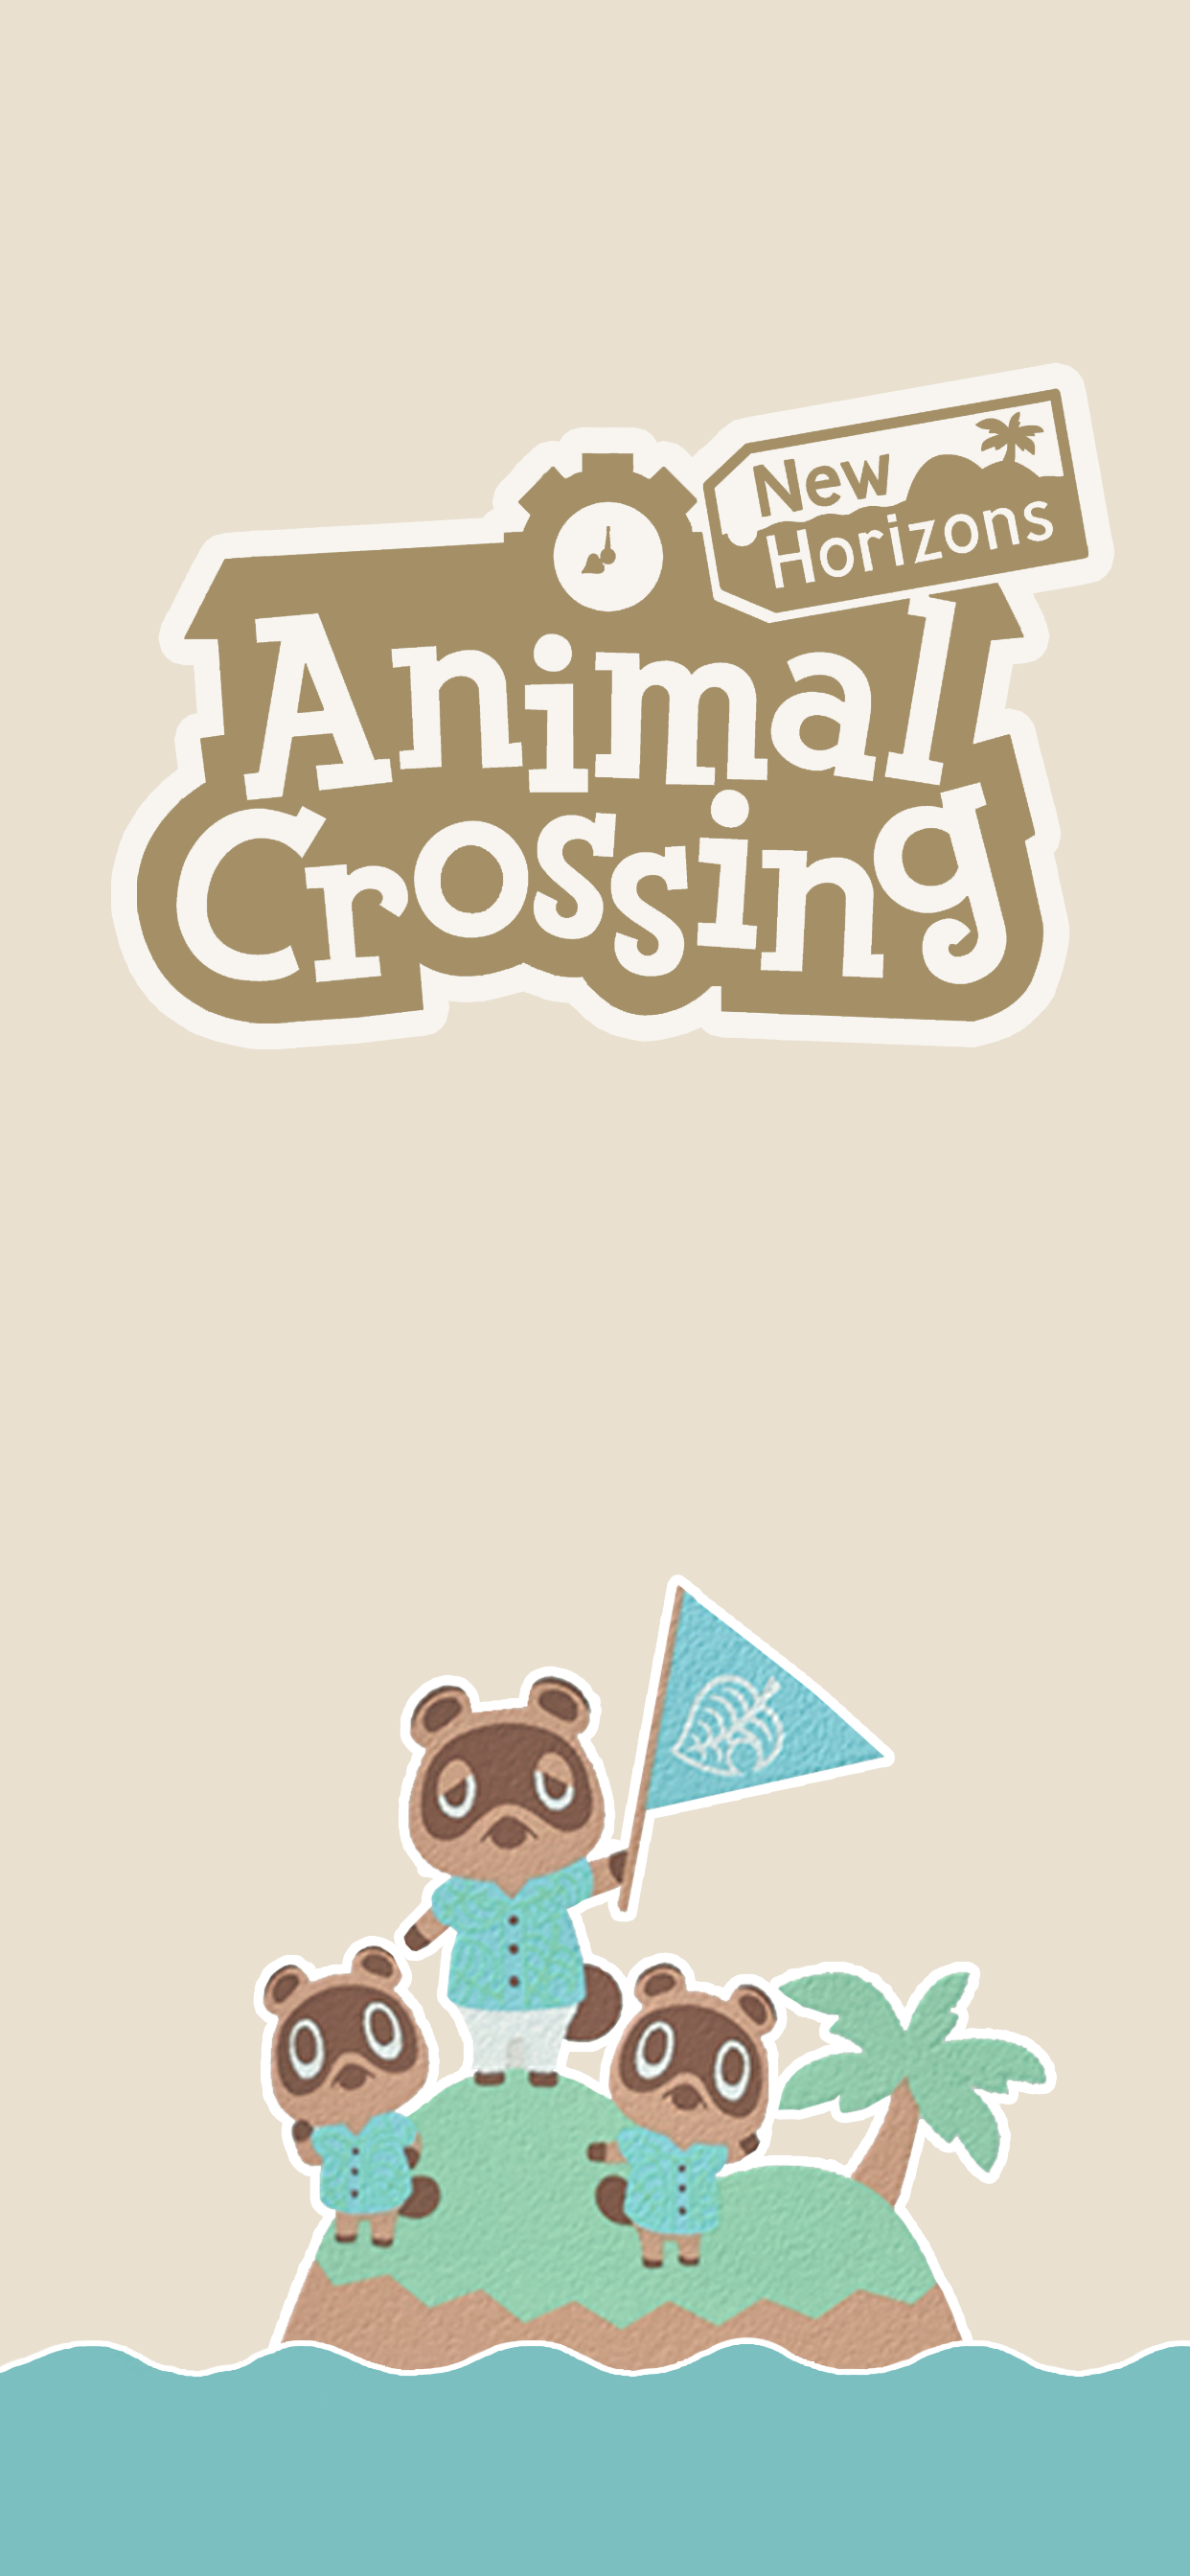 Phone wallpaper was sent to me from Nintendo Japan Thought I would share  with you all  rAnimalCrossing